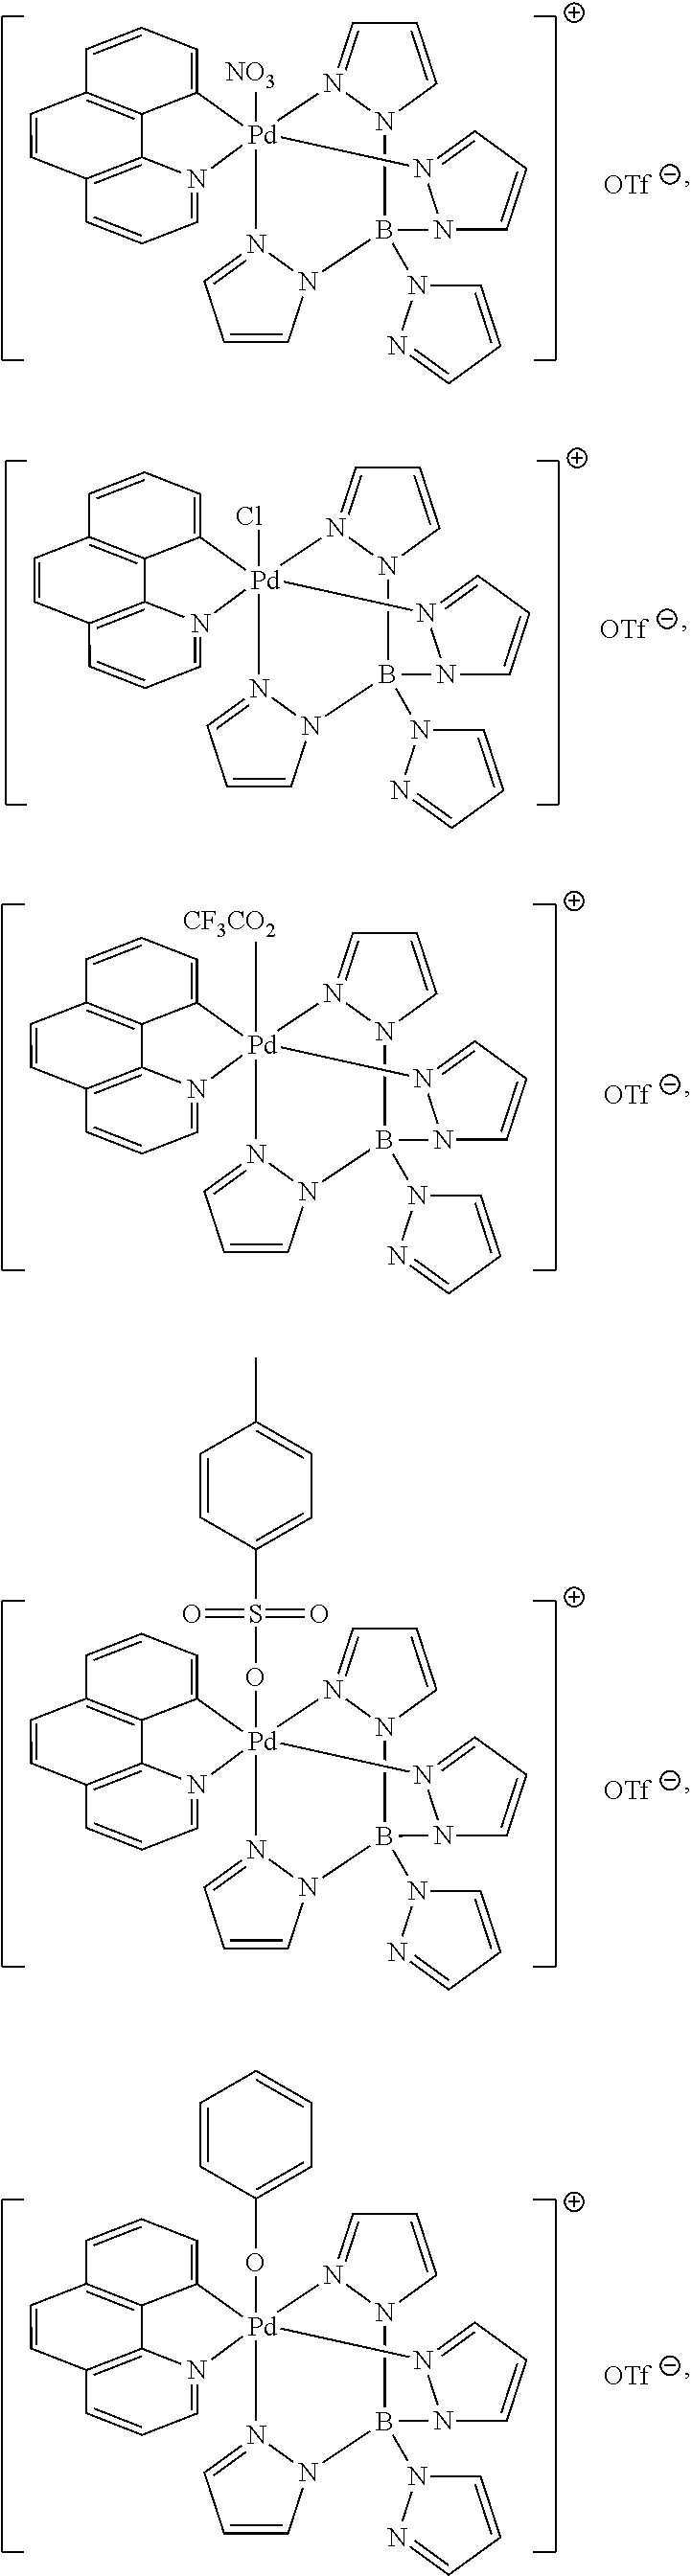 High-valent palladium fluoride complexes and uses thereof